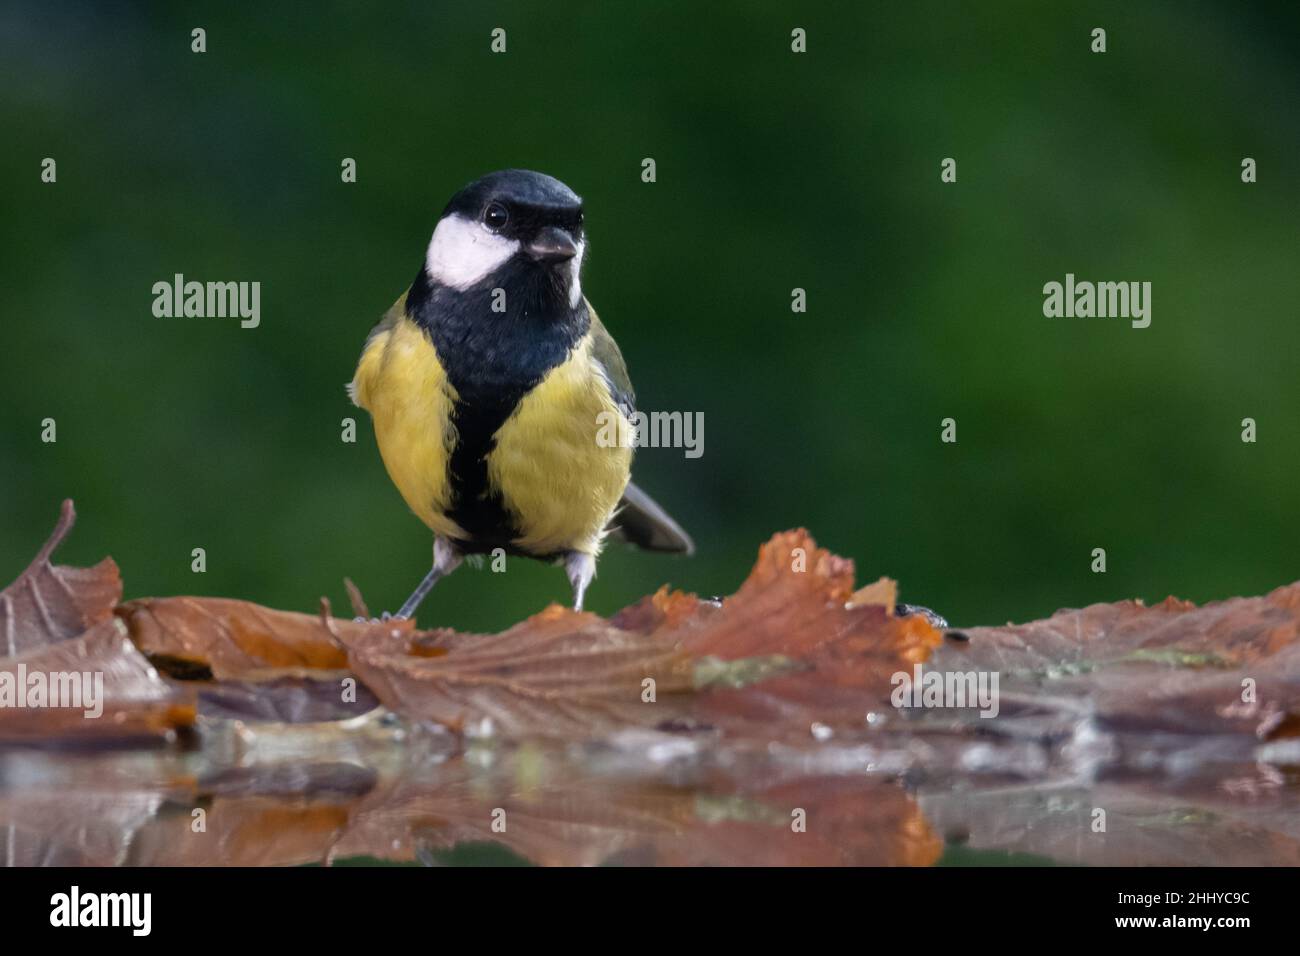 A great tit perched on dead oak leaves by the side of a pond Stock Photo